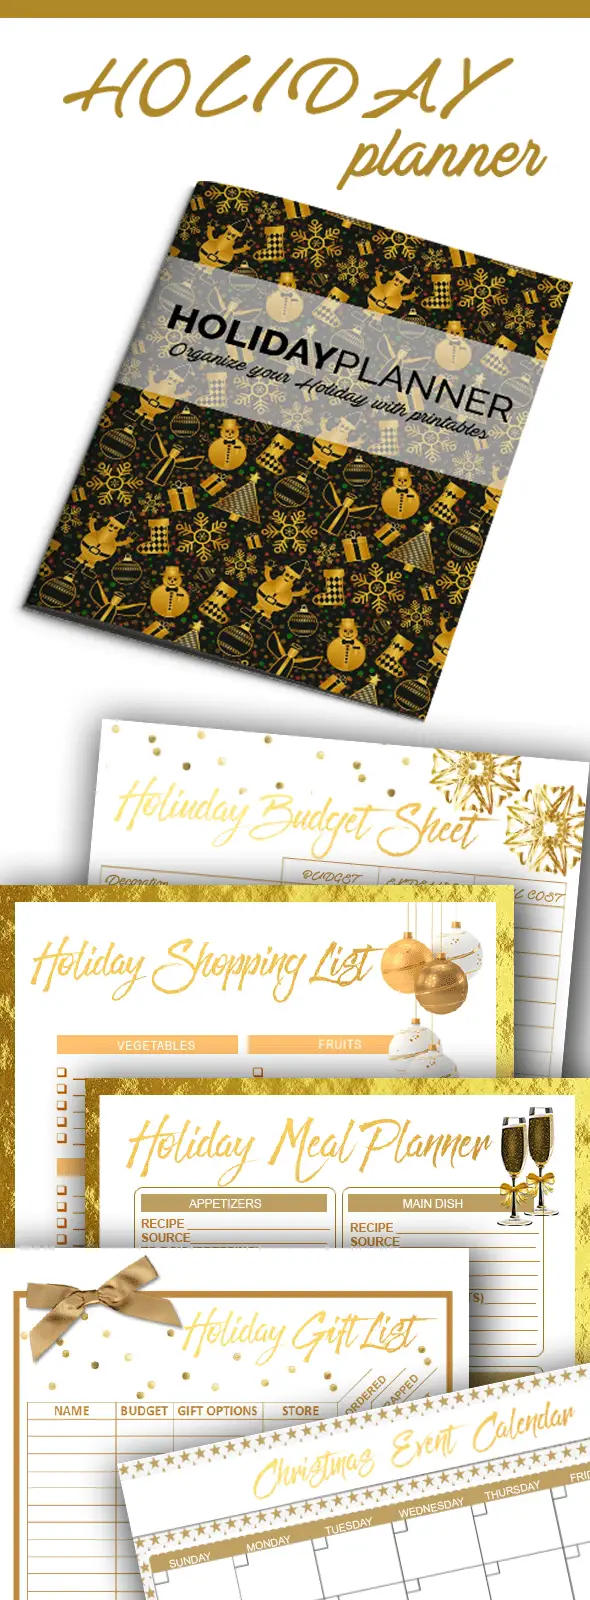 Printable Holiday Planner / You'll love these printable organization sheets and lists to get your holiday more organized. Budget sheet, gift list, menu planning, event calendar and shopping lists!